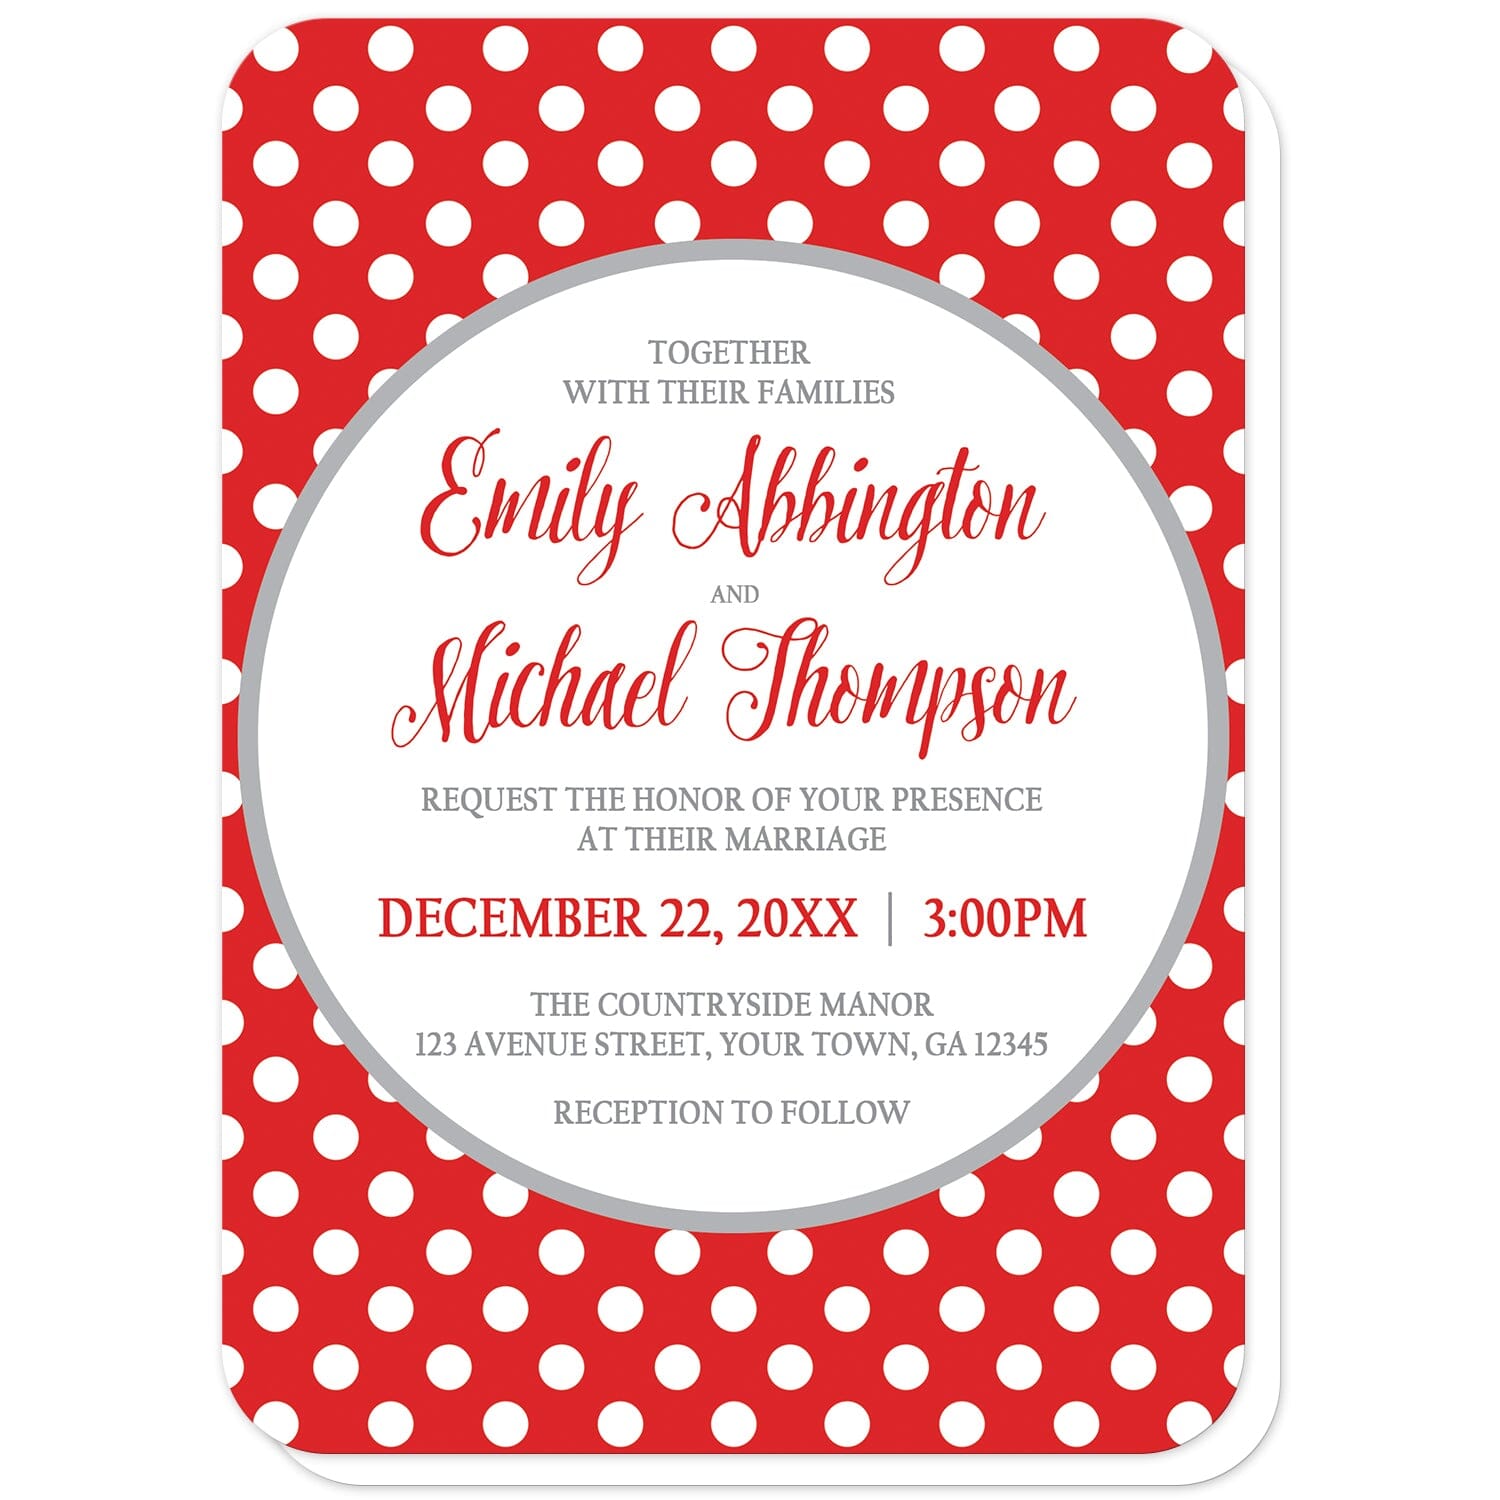 Gray and Red Polka Dot Wedding Invitations (with rounded corners) at Artistically Invited. Gray and red polka dot wedding invitations with your personalized marriage celebration details custom printed in red and gray inside a white circle outlined in light gray, over a red polka dot pattern with white polka dots over red.